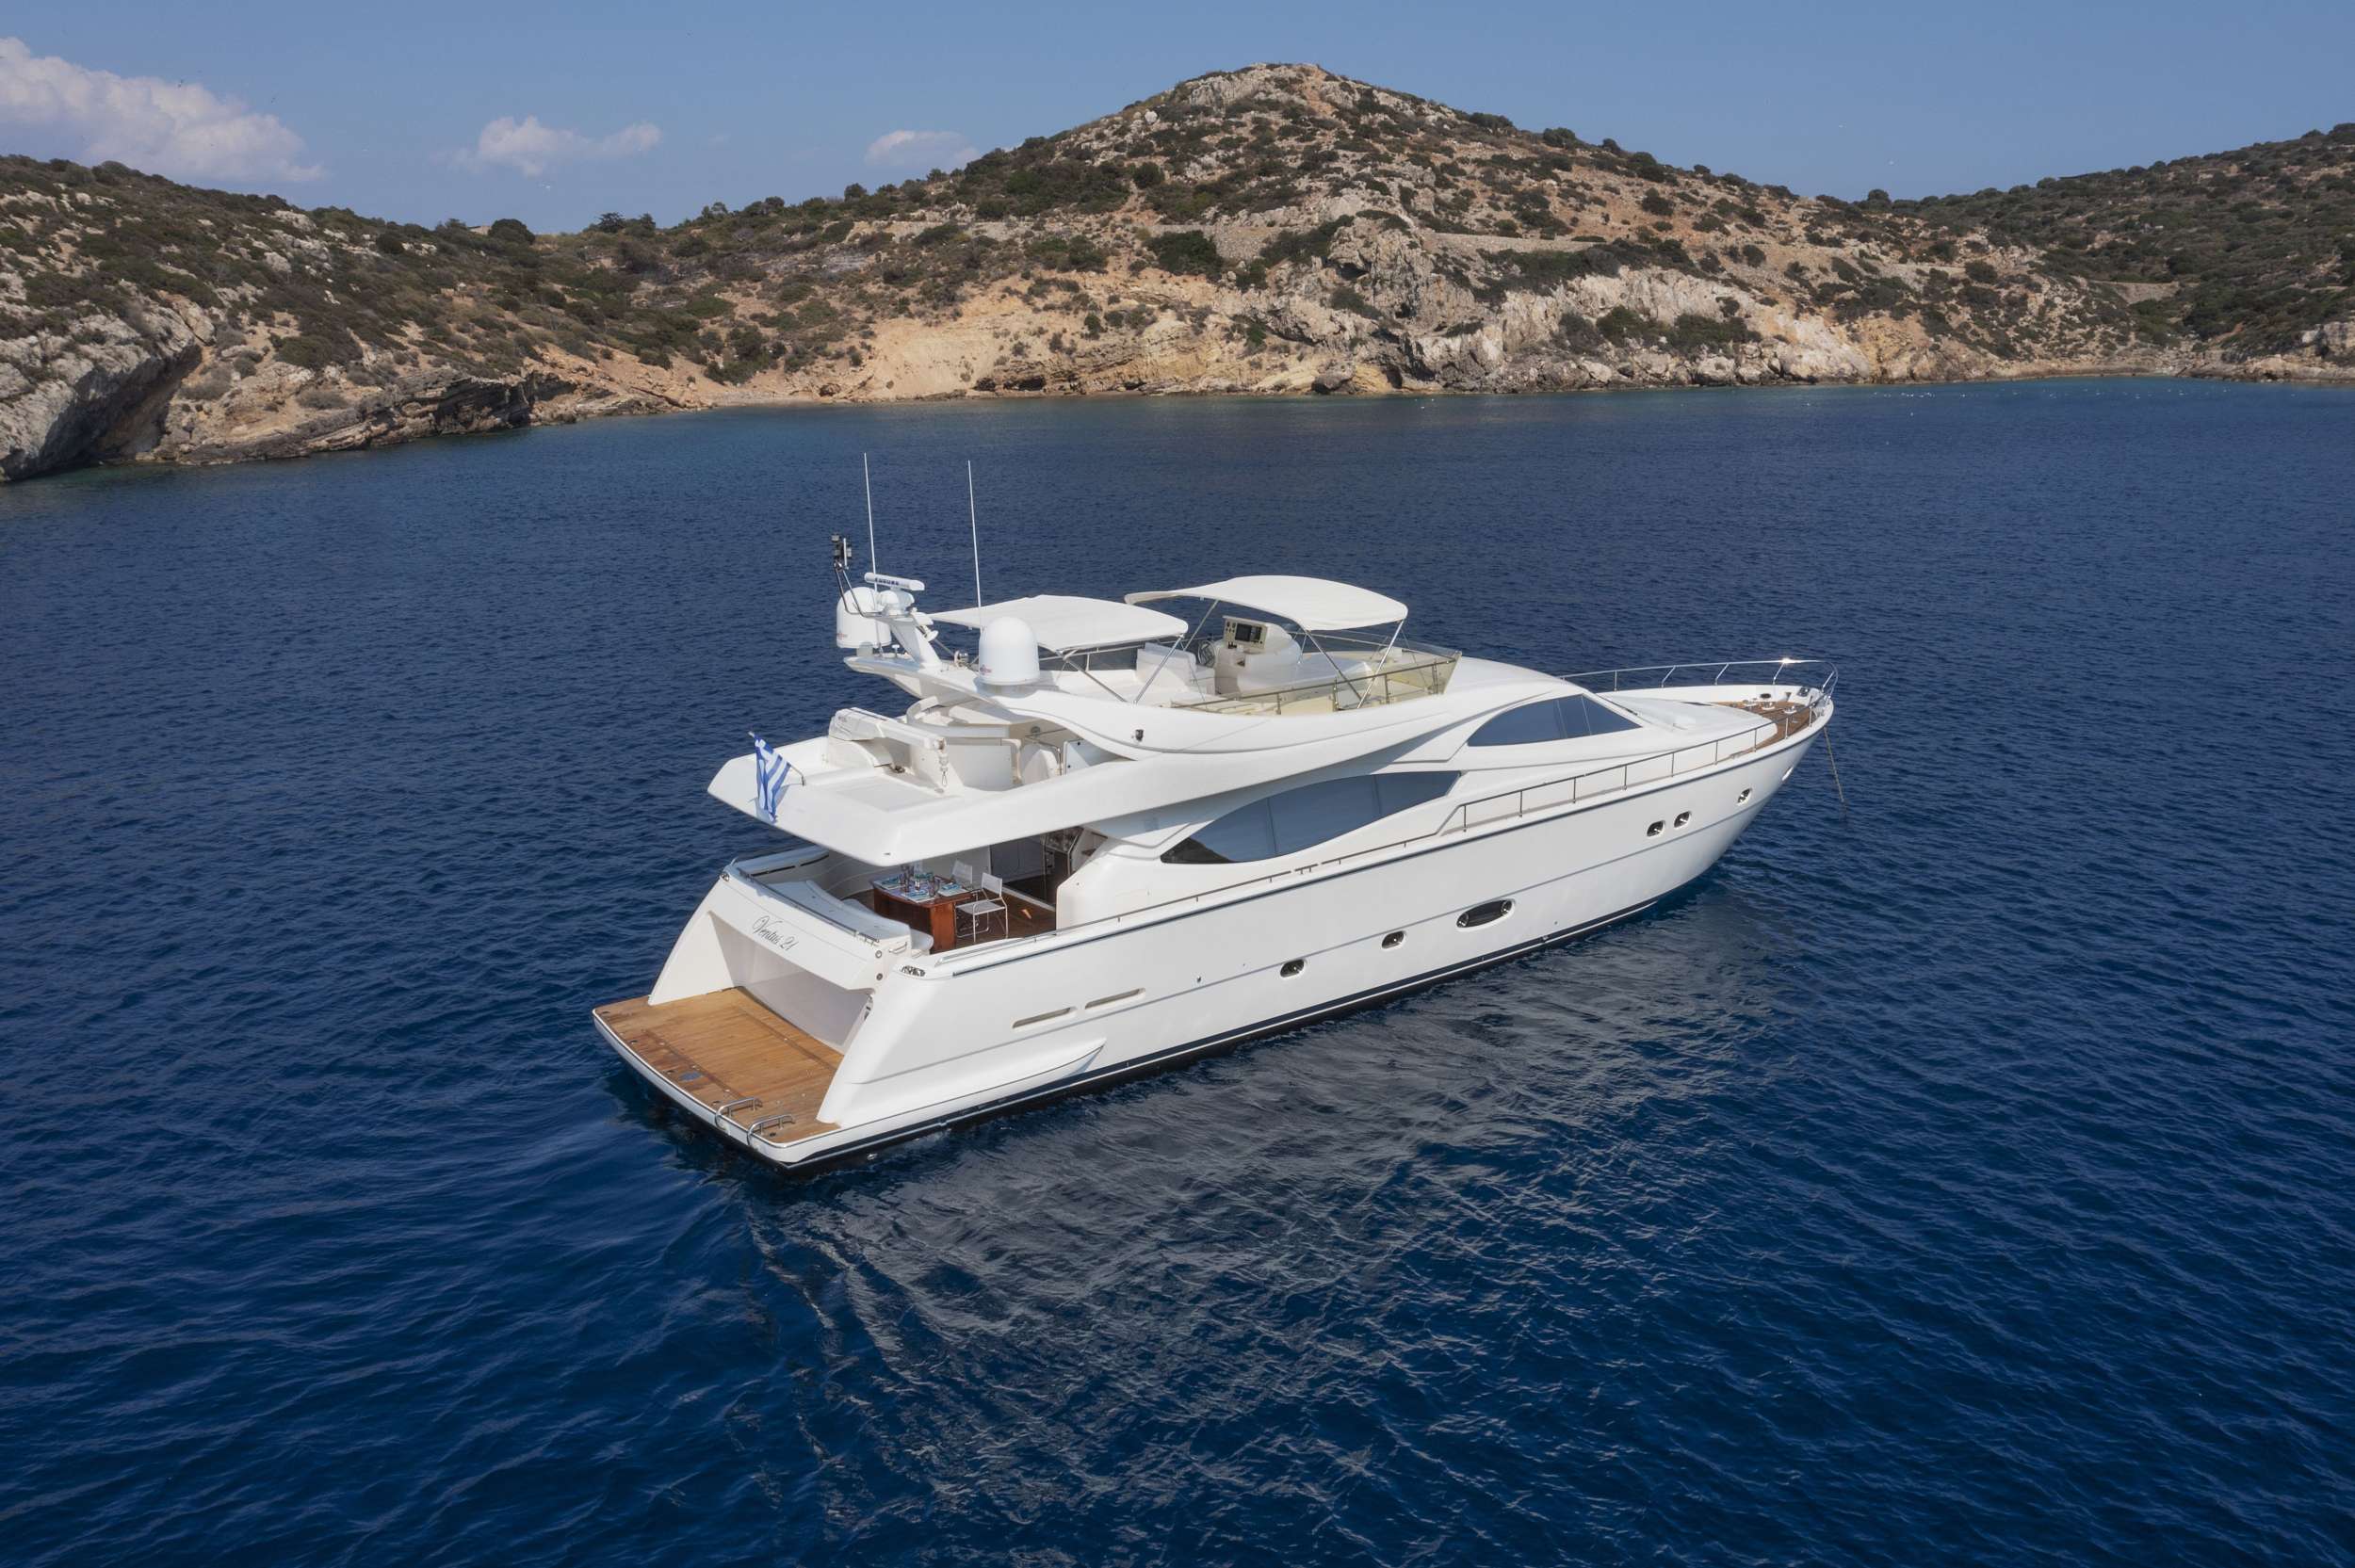 Ventus 21 - Yacht Charter Kanistro & Boat hire in Greece 1